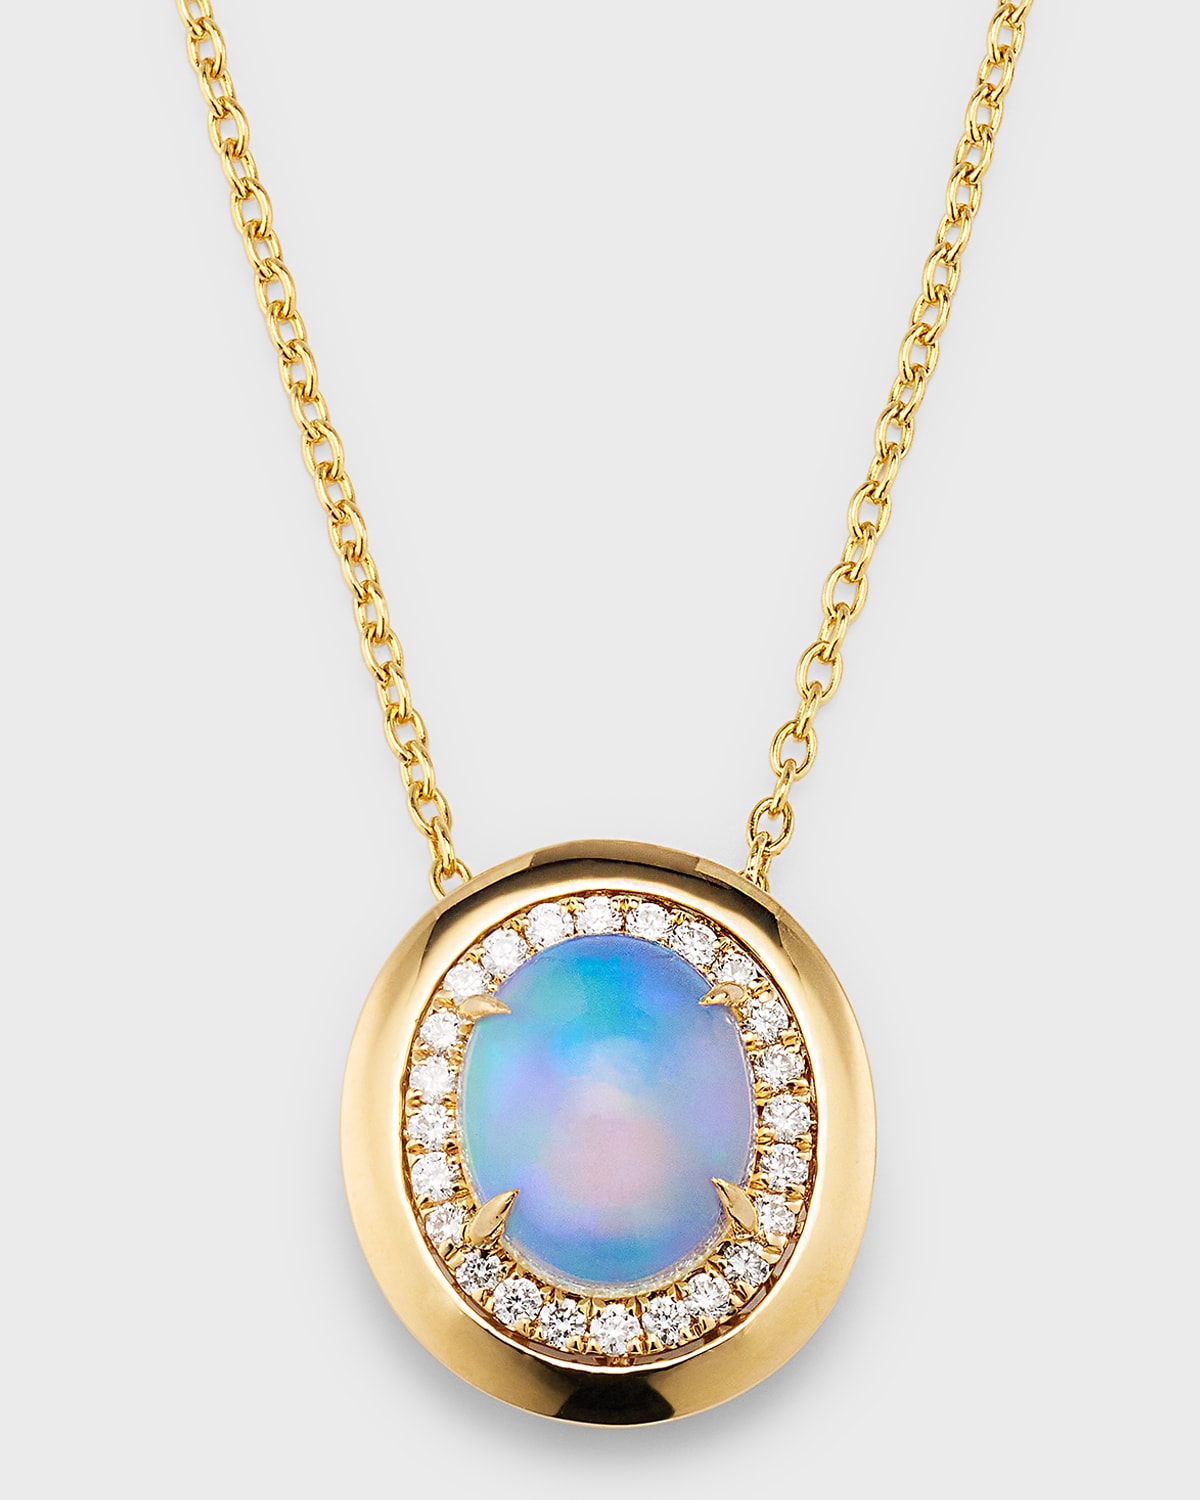 18K Yellow Gold Pendant with Oval Opal and Diamonds, 2.24tcw